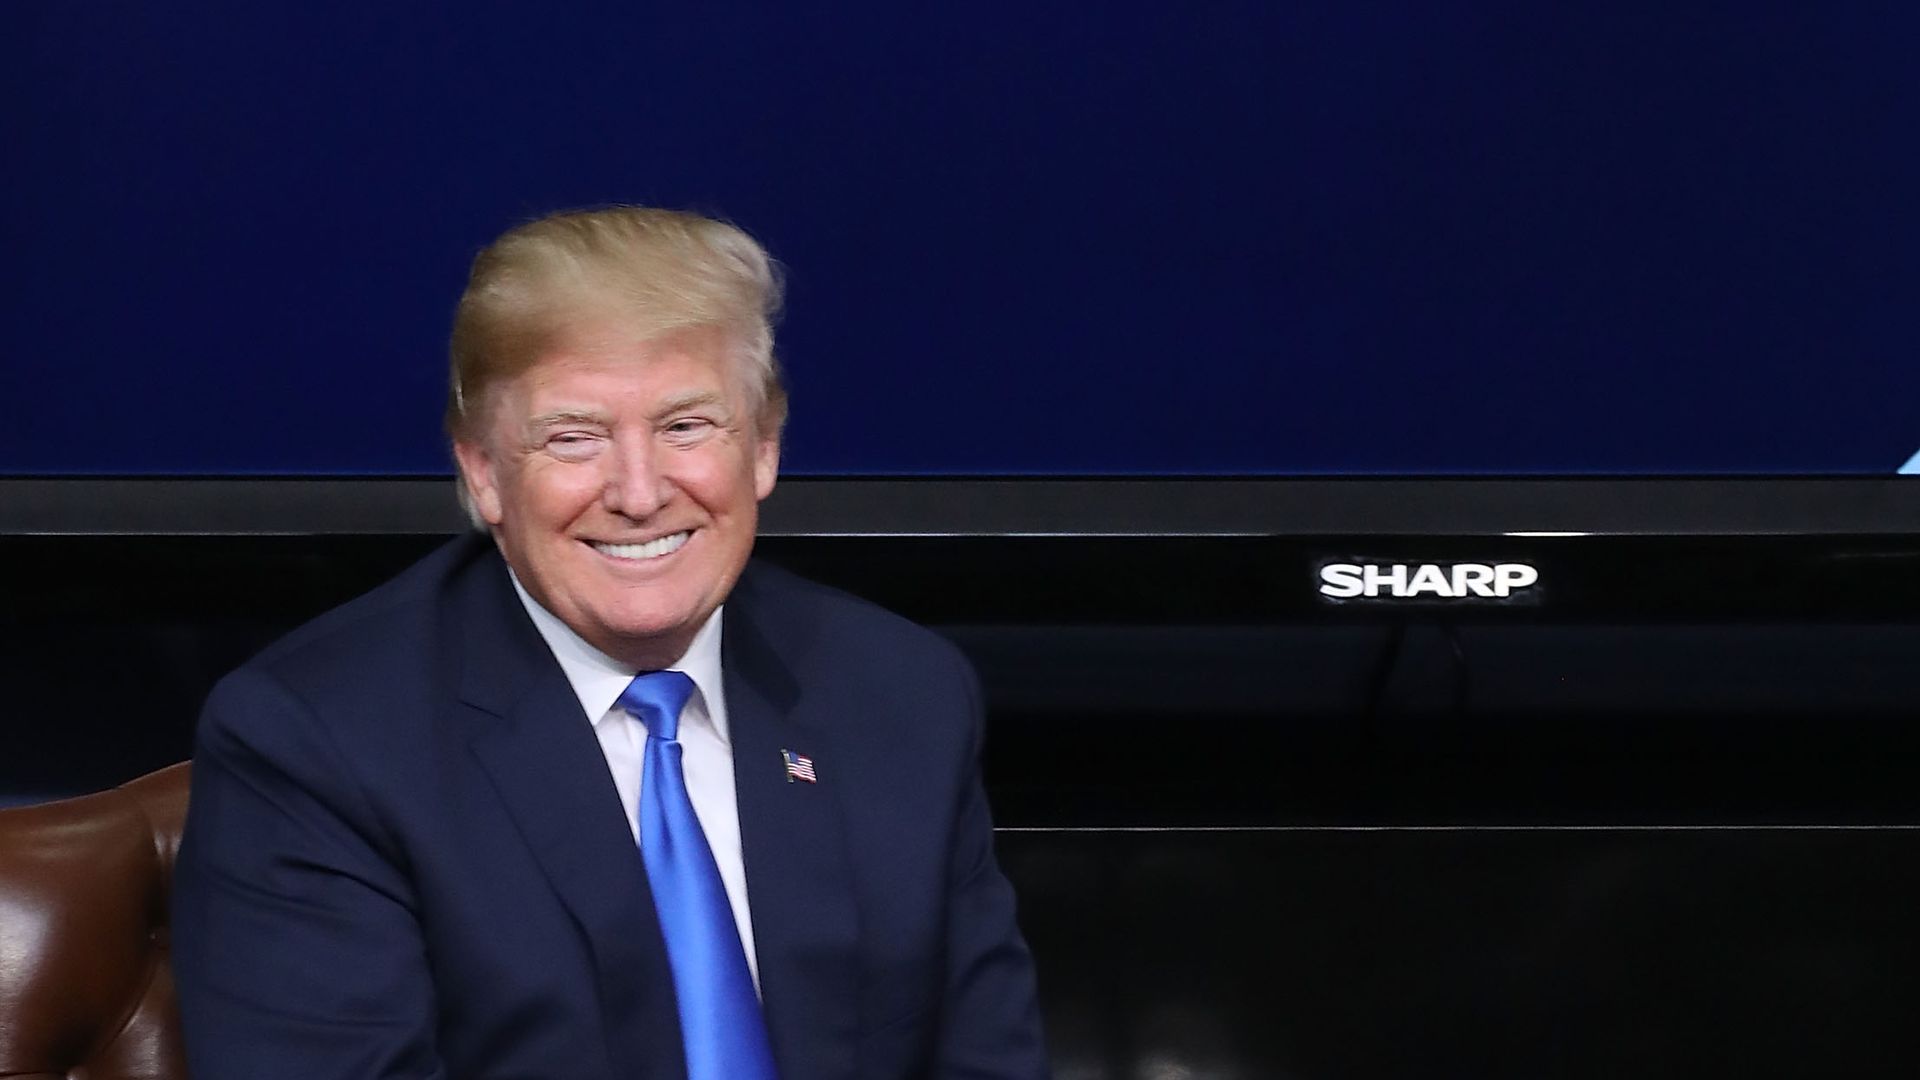 Donald Trump smiling and sitting next to a wooden table with plastic water bottles on it